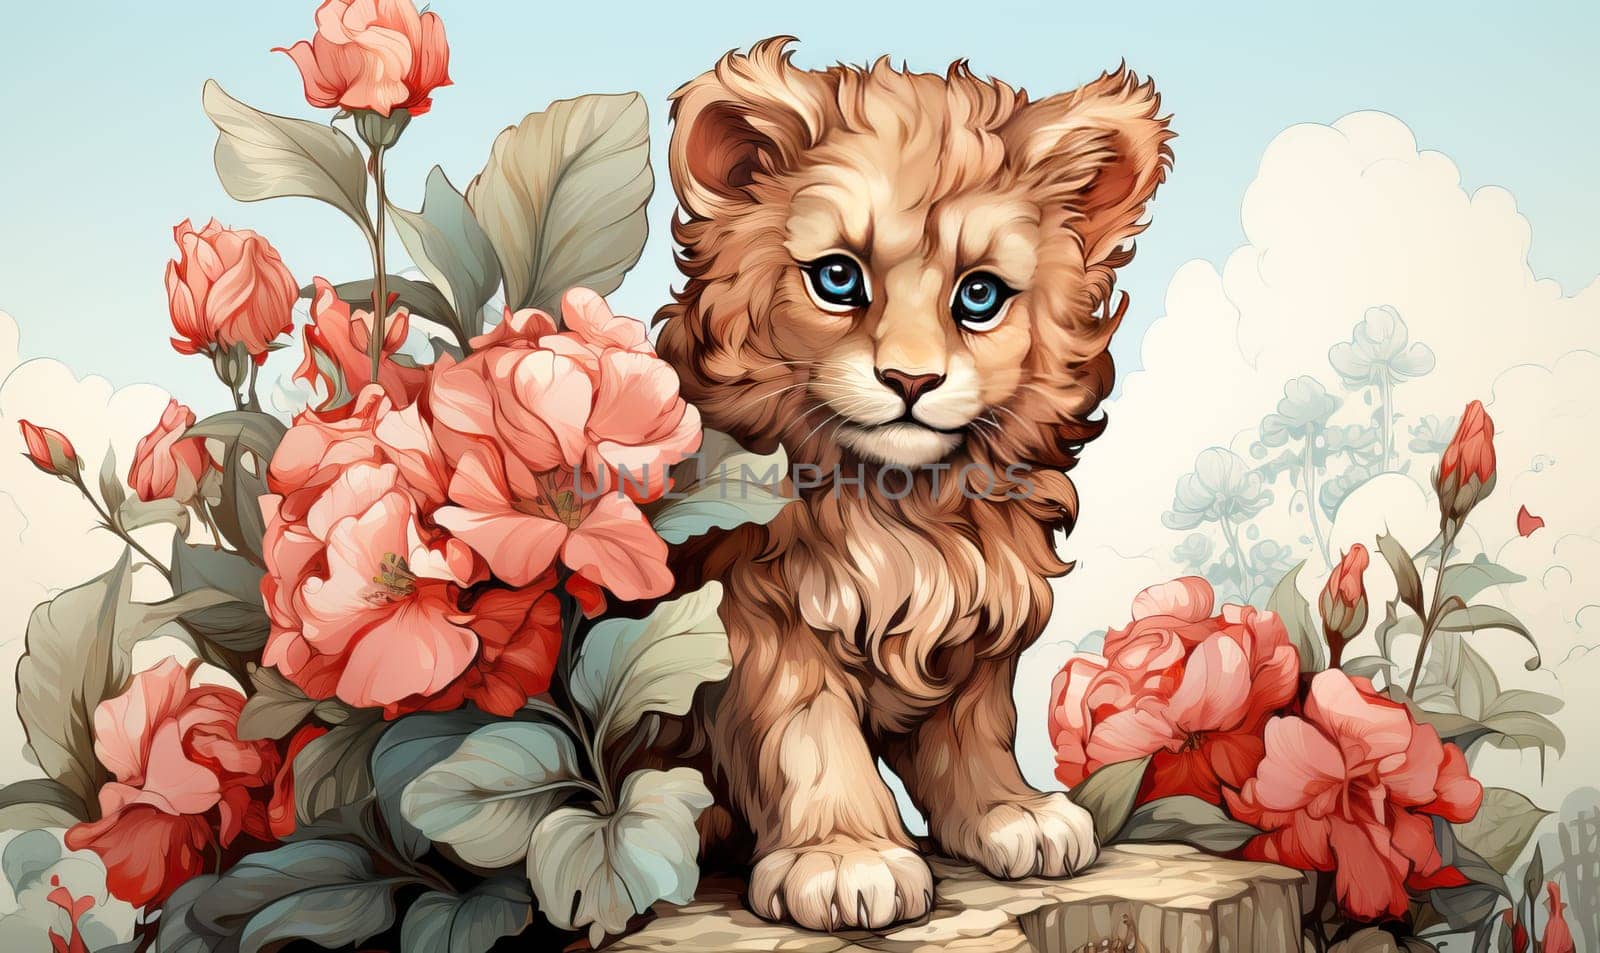 Color illustration of a lion cub on a natural background. Selective soft focus.